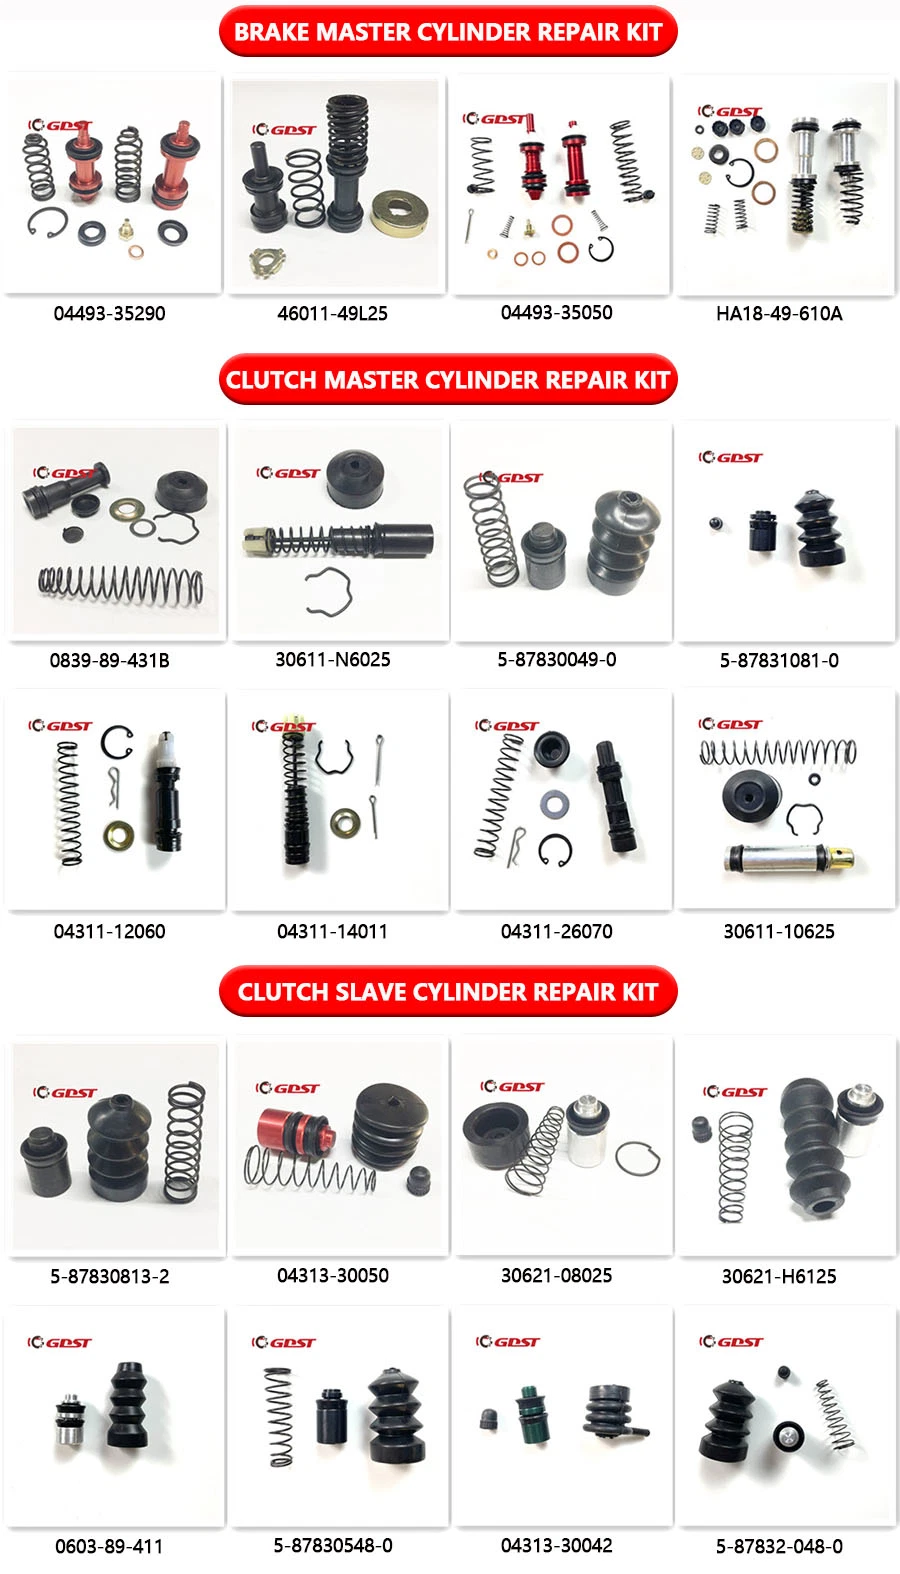 GDST China Professional Manufacturer 0839-89-431b 083989431b Clutch Master Cylinder Repair Kits for Mazda